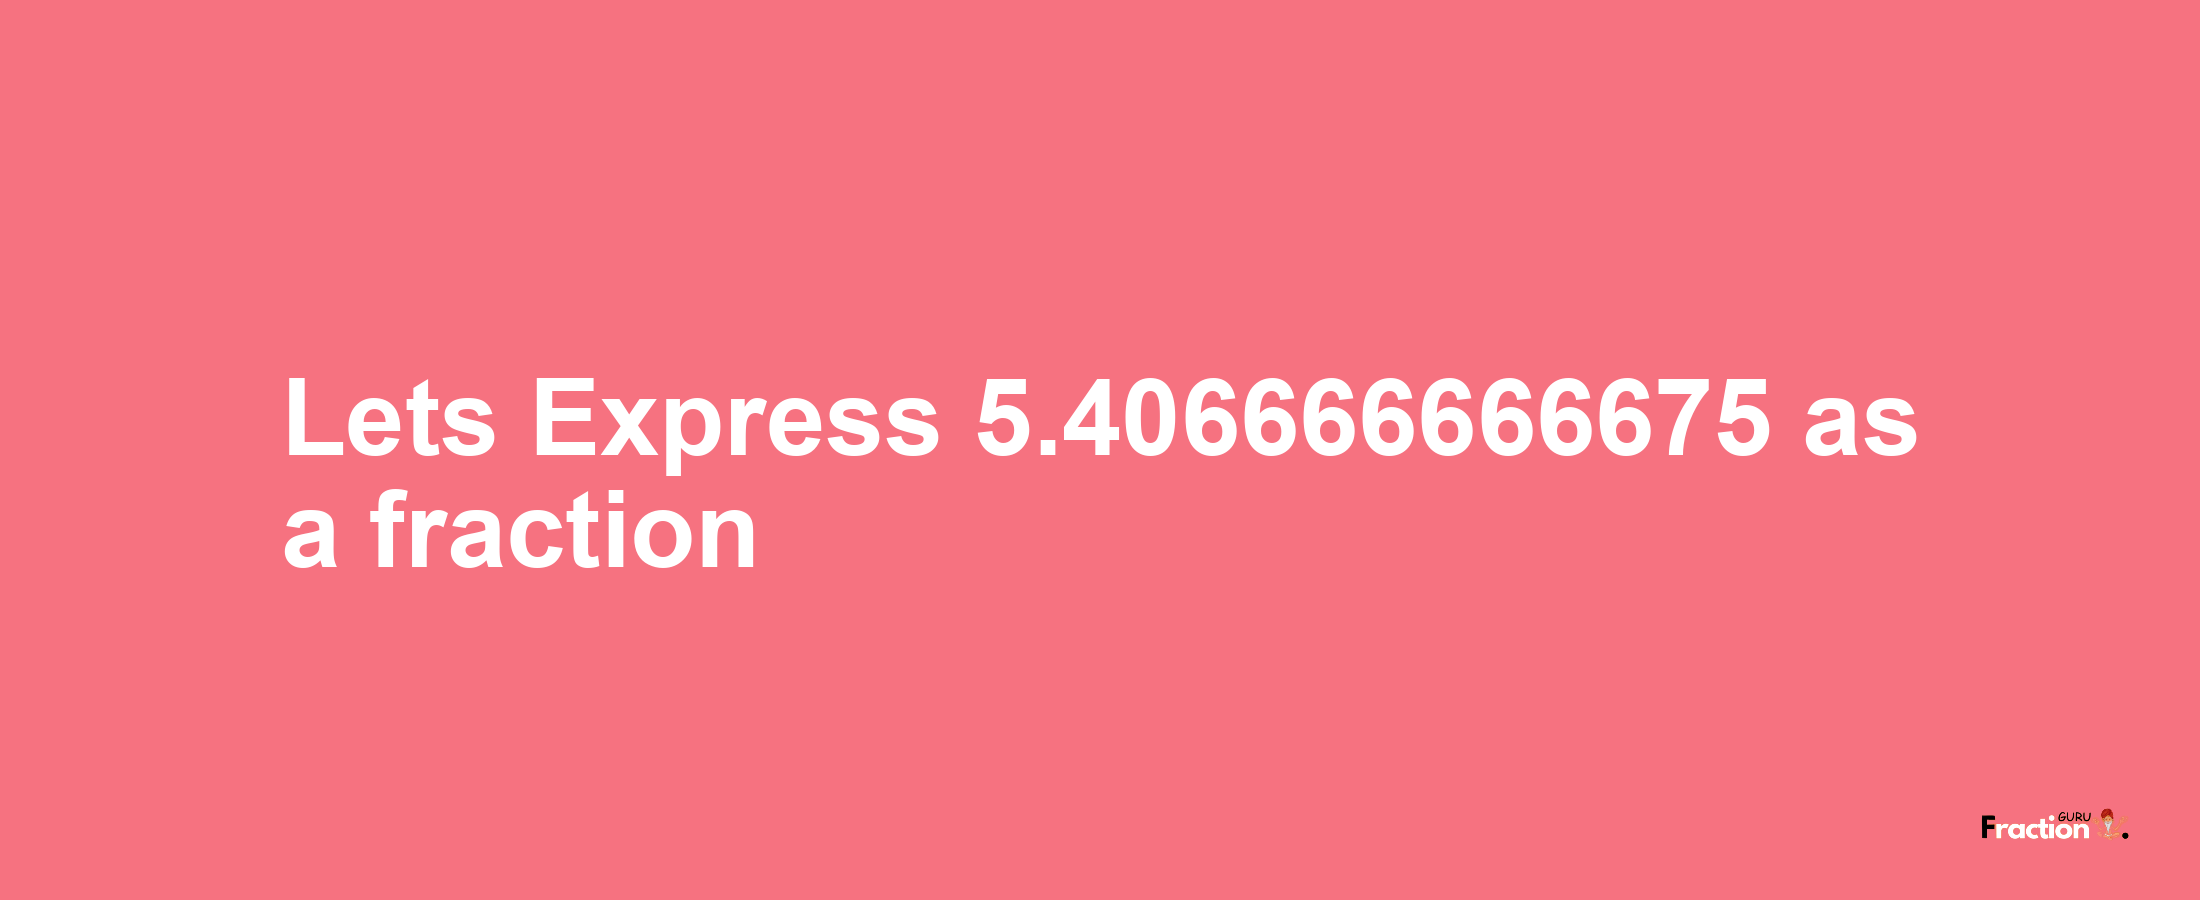 Lets Express 5.406666666675 as afraction